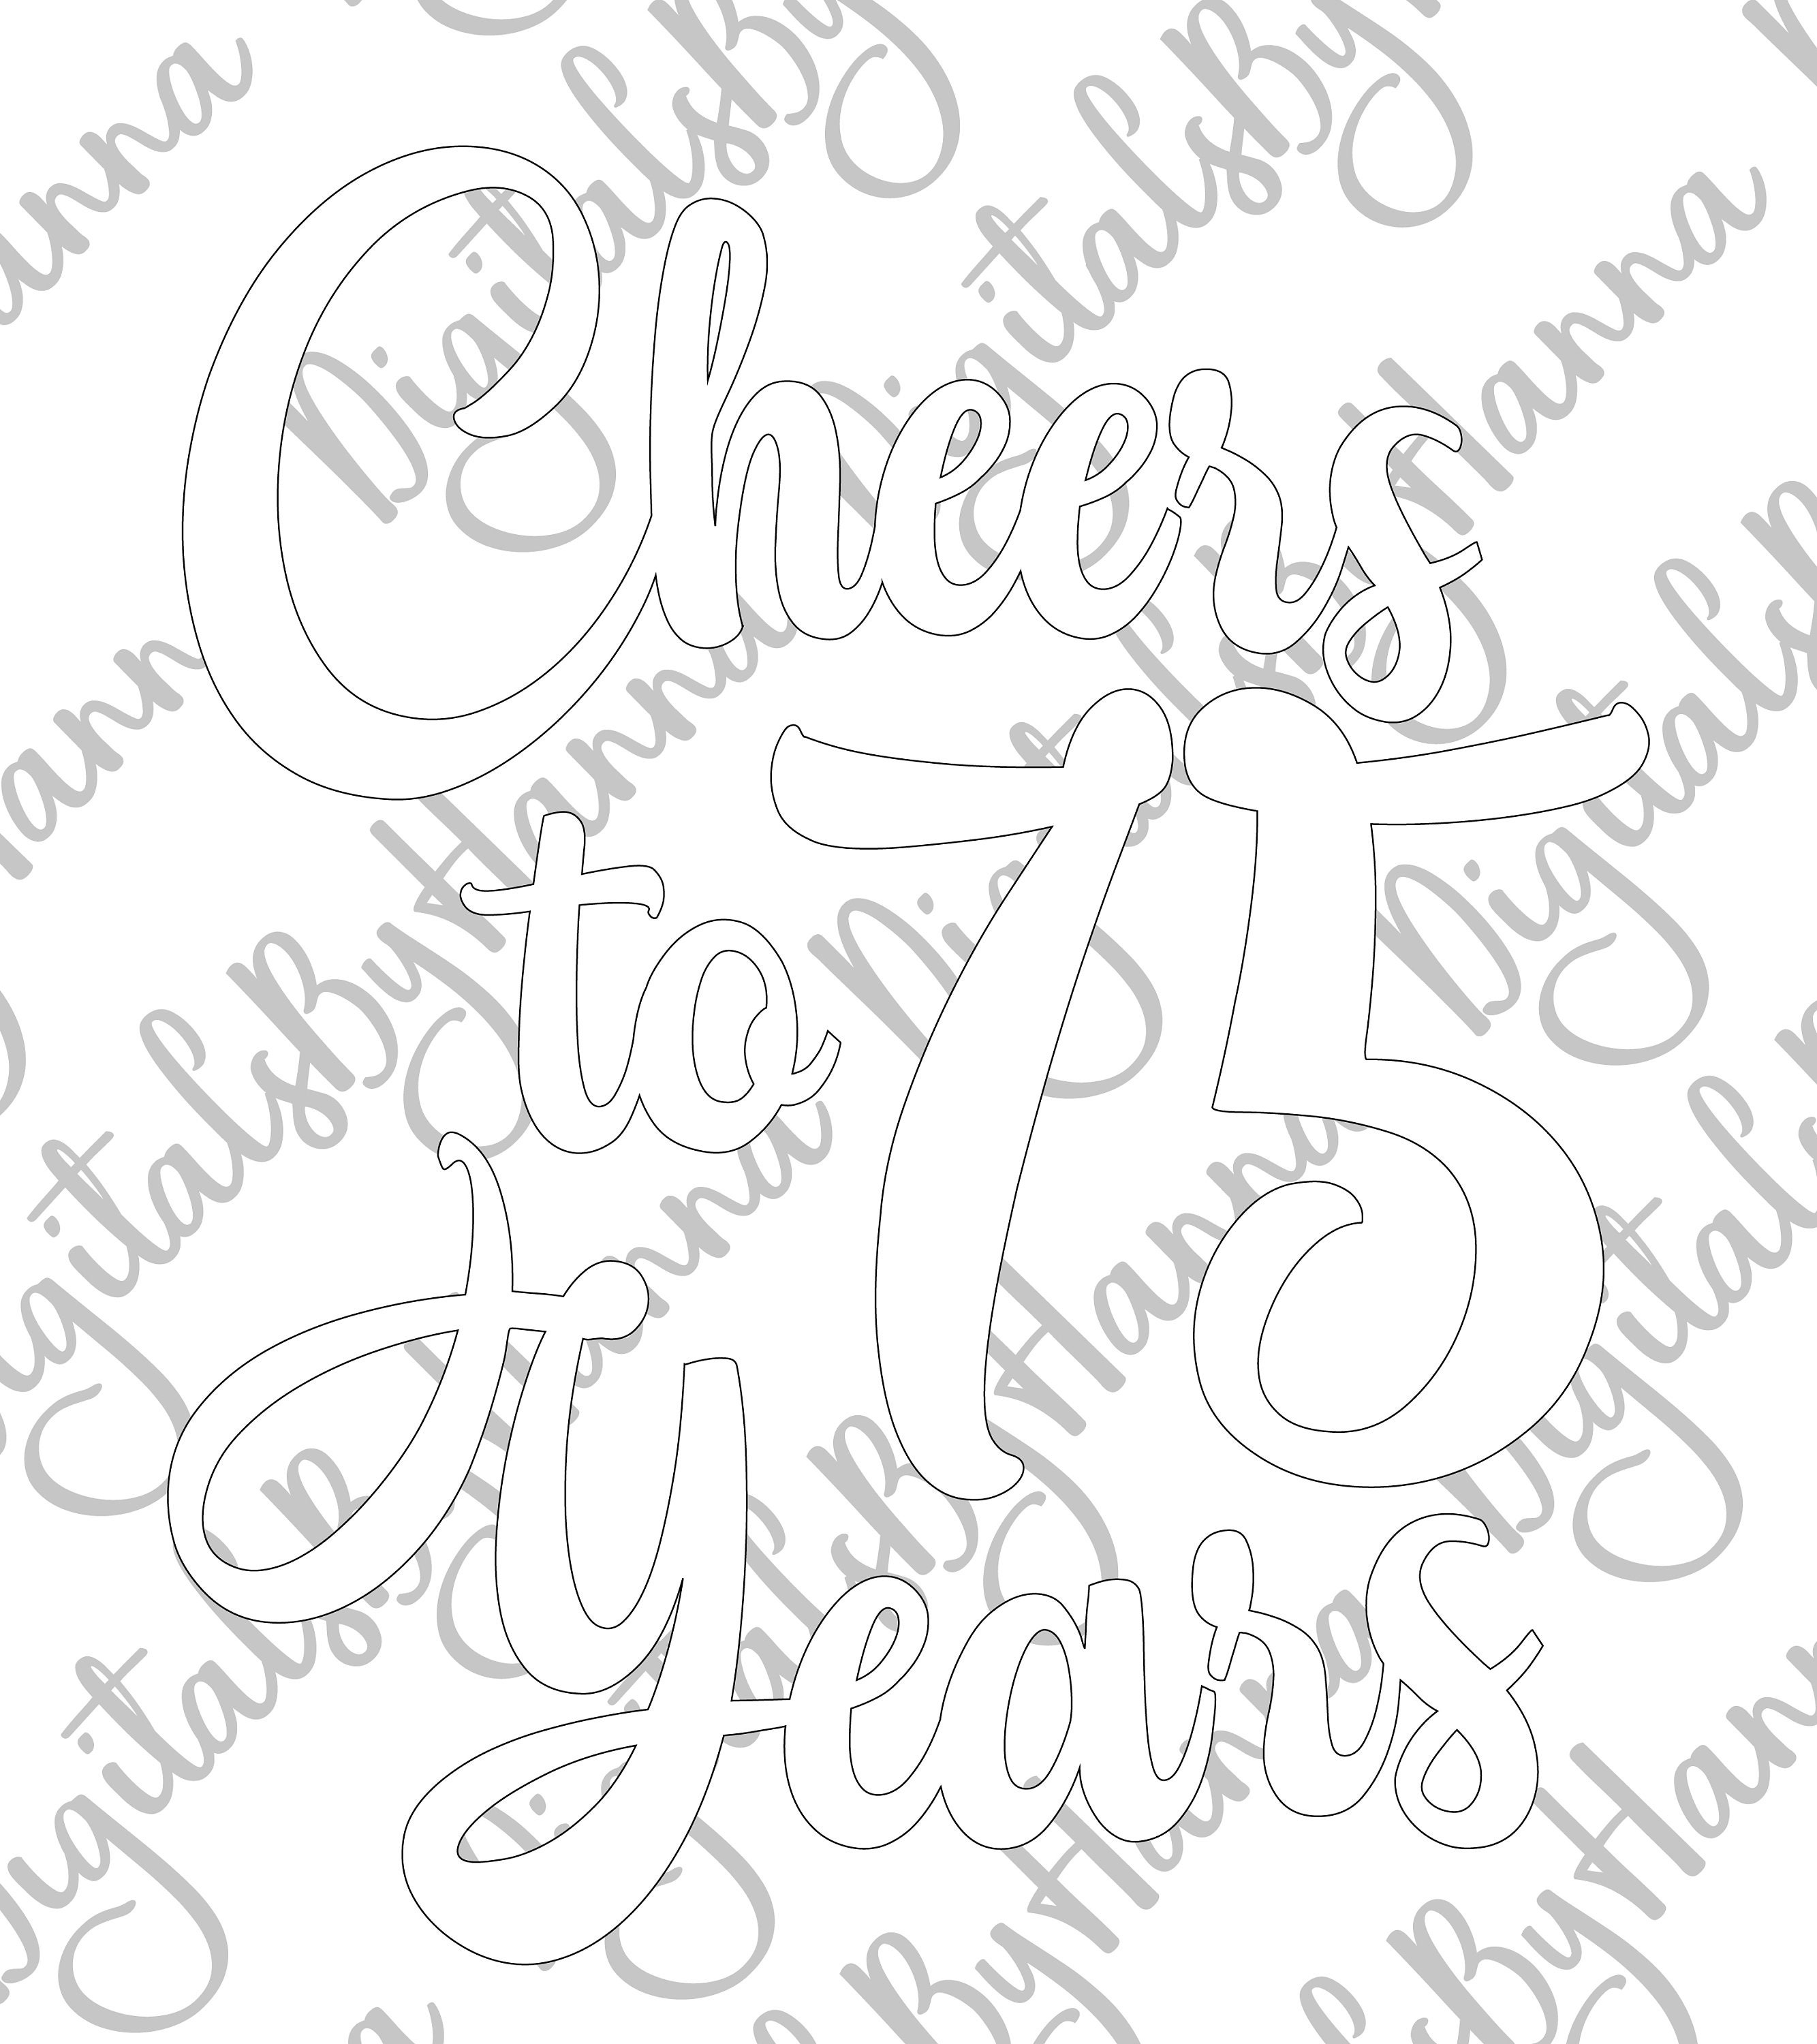 75th Birthday SVG Files for Cricut Saying Cheer to 75 Year Old | Etsy